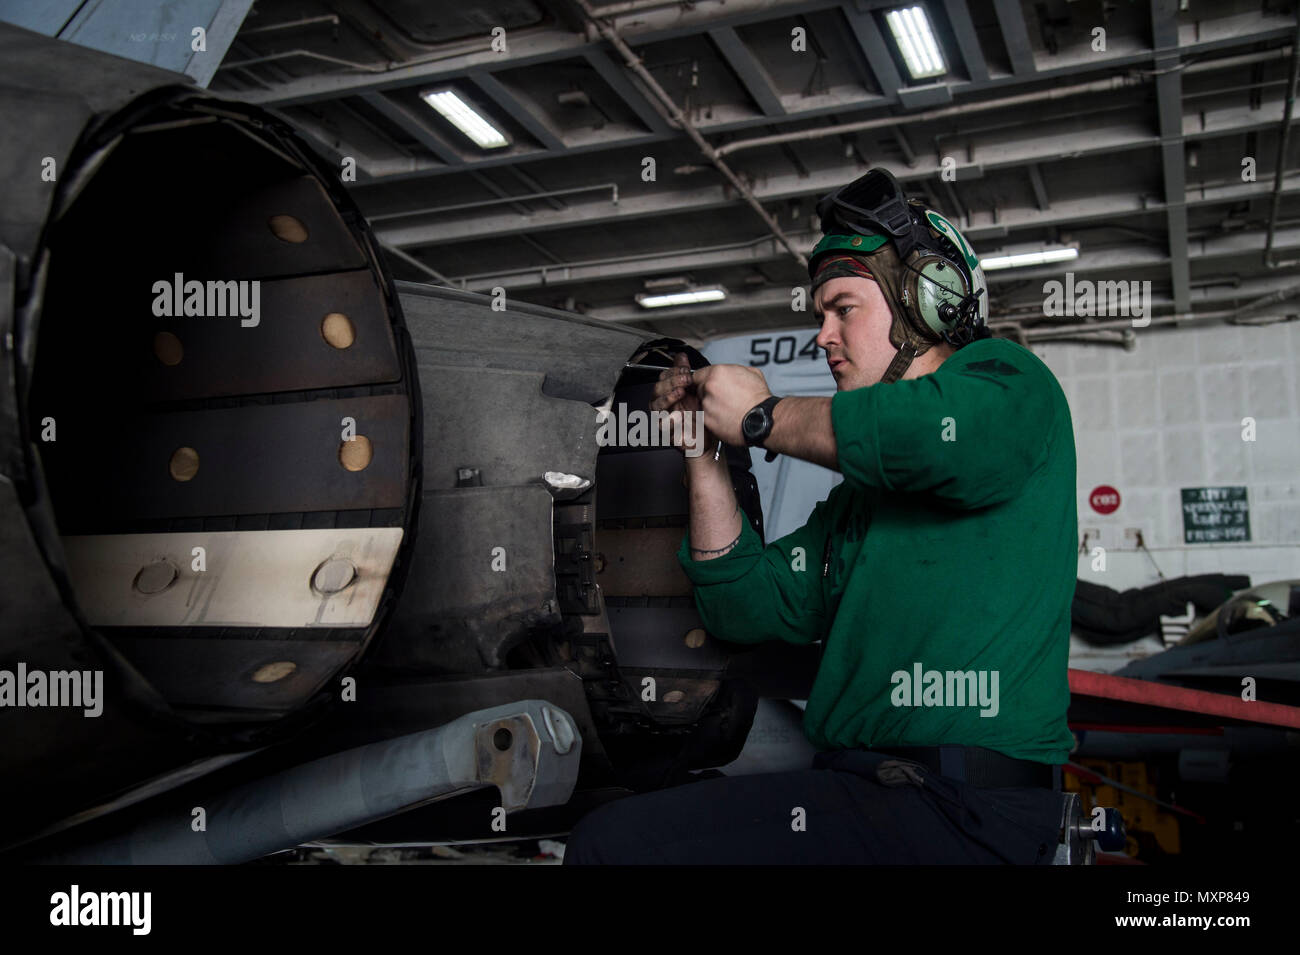 161125-N-QI061-032    ARABIAN GULF (Nov. 25, 2016) Petty Officer 3rd Class Jacob Wiggs, from Roswell, N.M. inspects the variable exhaust nozzle for a 200-hour flight engine inspection in the hangar bay of the aircraft carrier USS Dwight D. Eisenhower (CVN 69) (Ike). Ike and its Carrier Strike Group are deployed in support of Operation Inherent Resolve, maritime security operations and theater security cooperation efforts in the U.S. 5th Fleet area of operations. (U.S. Navy photo by Petty Officer 3rd Class Nathan T. Beard) Stock Photo